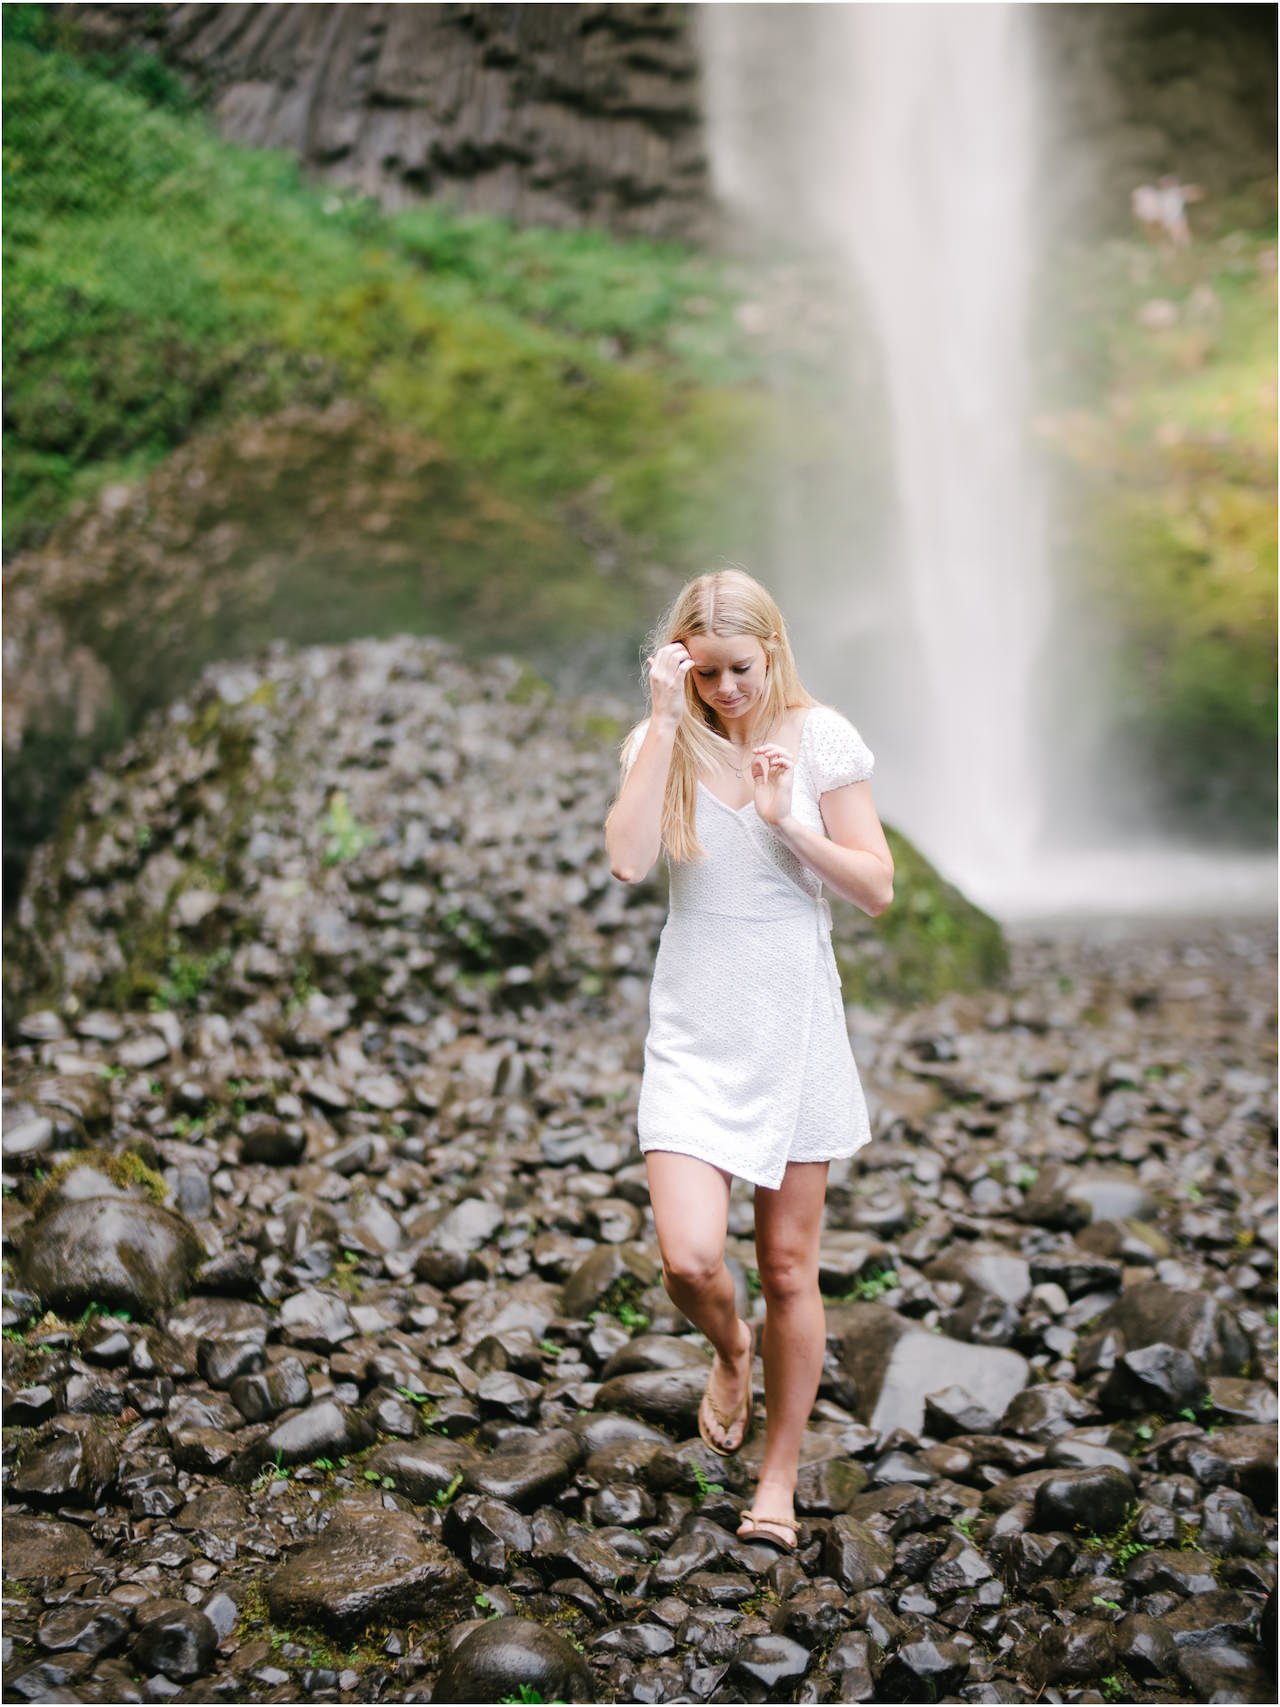  Tall blonde high school student in white dress walks on wet stones away from large waterfall 